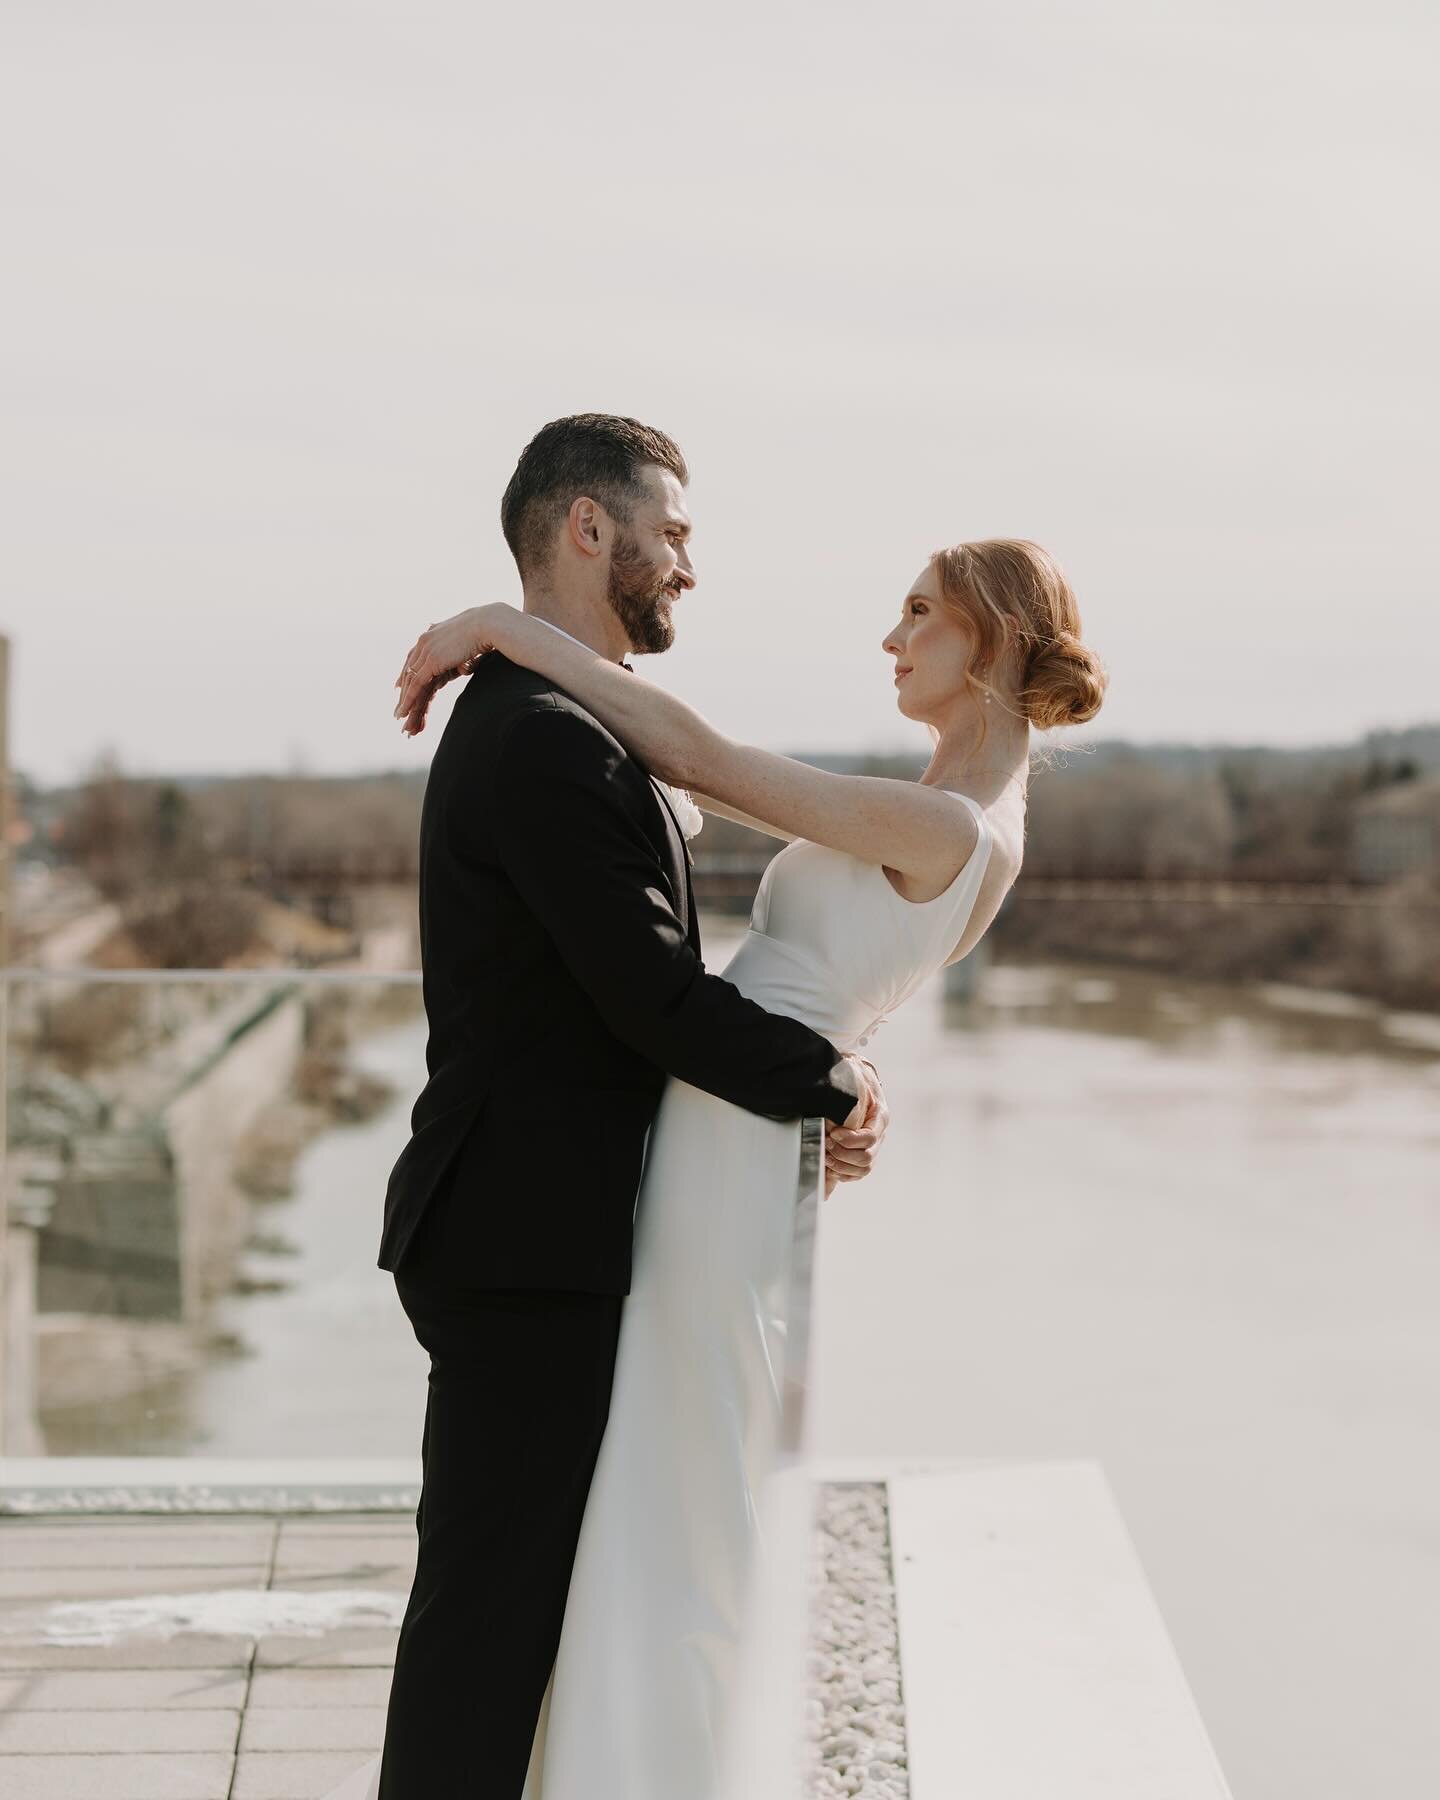 A moment for the newlyweds&hellip; and this view of the river.🪶